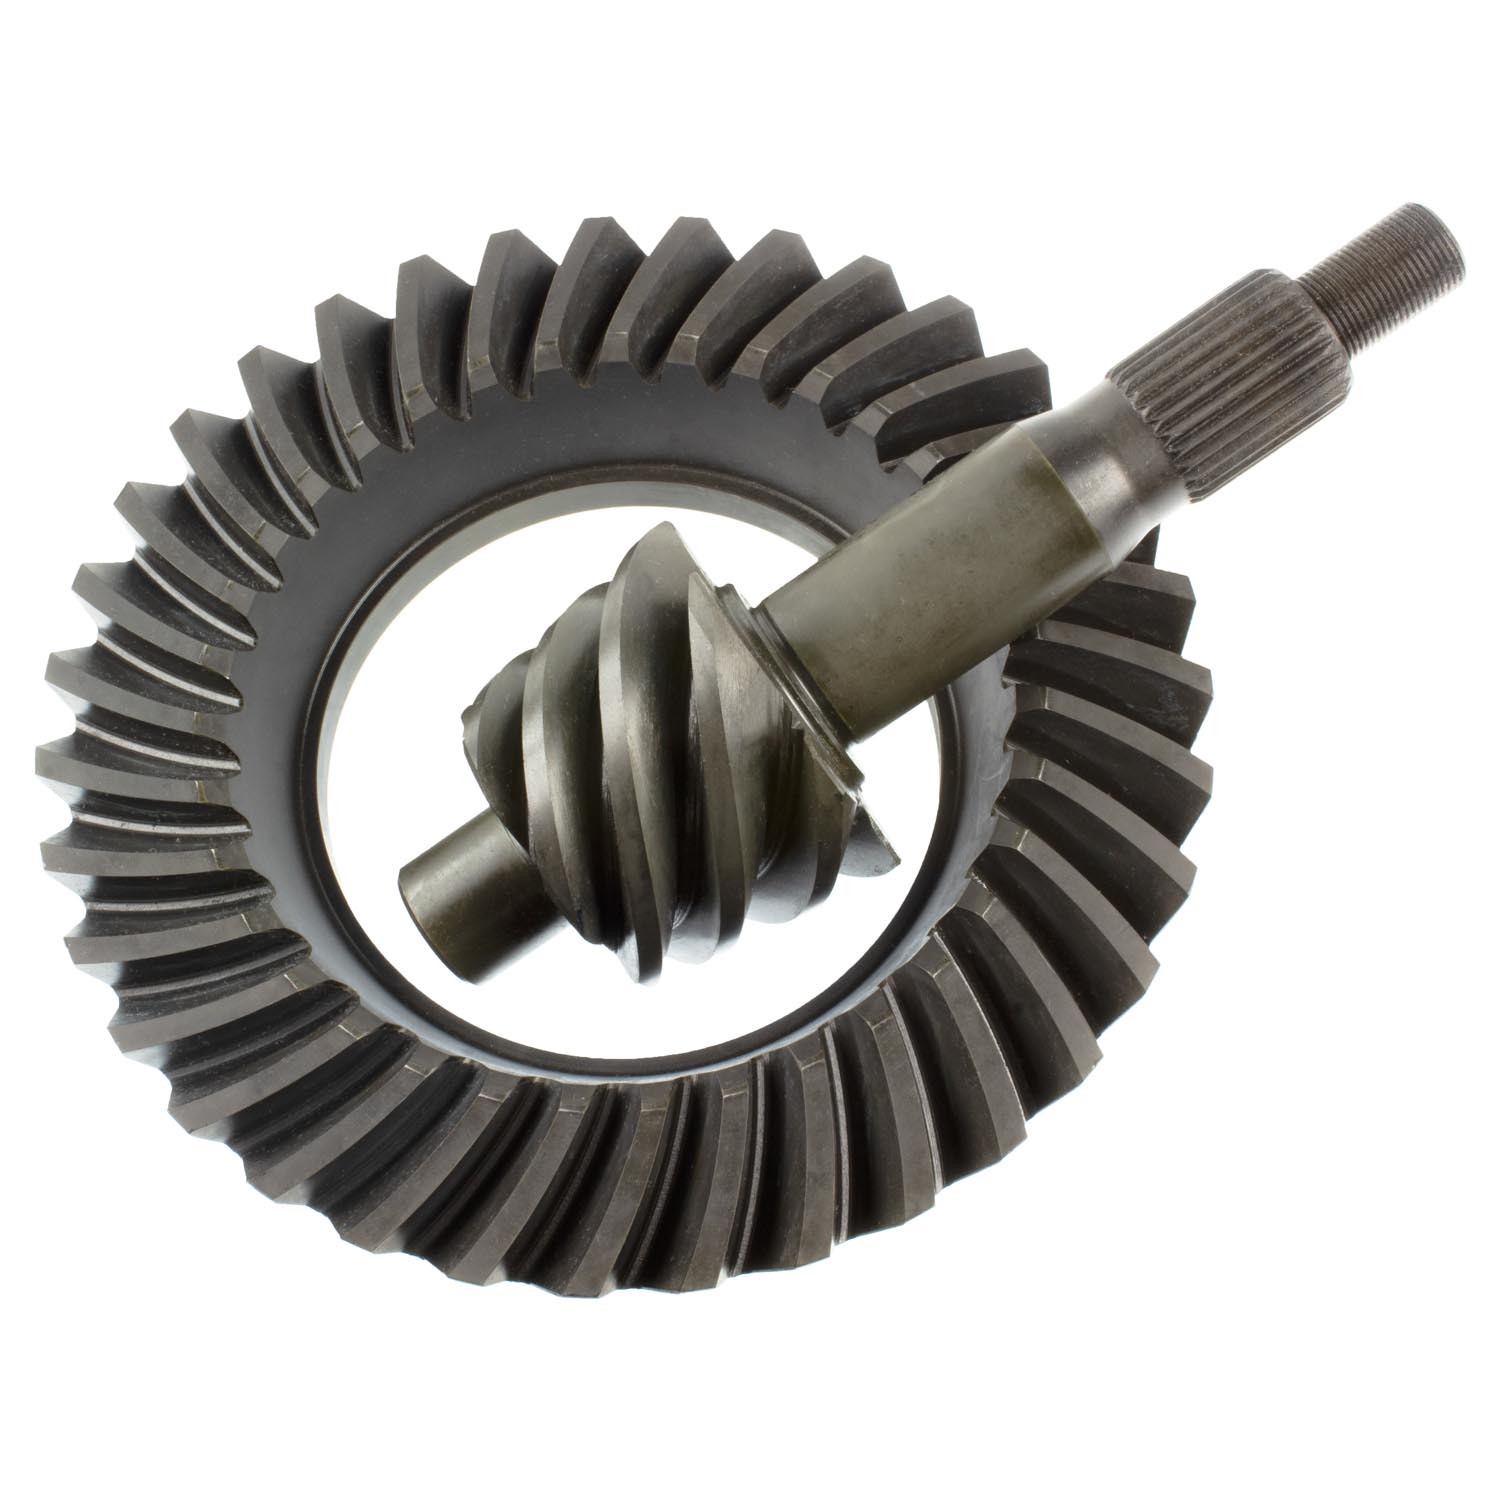 Richmond Gear F9583 - Ring and Pinion, Excel, 5.83 Ratio, 28 Spline Pinion, Ford 9 in, Kit